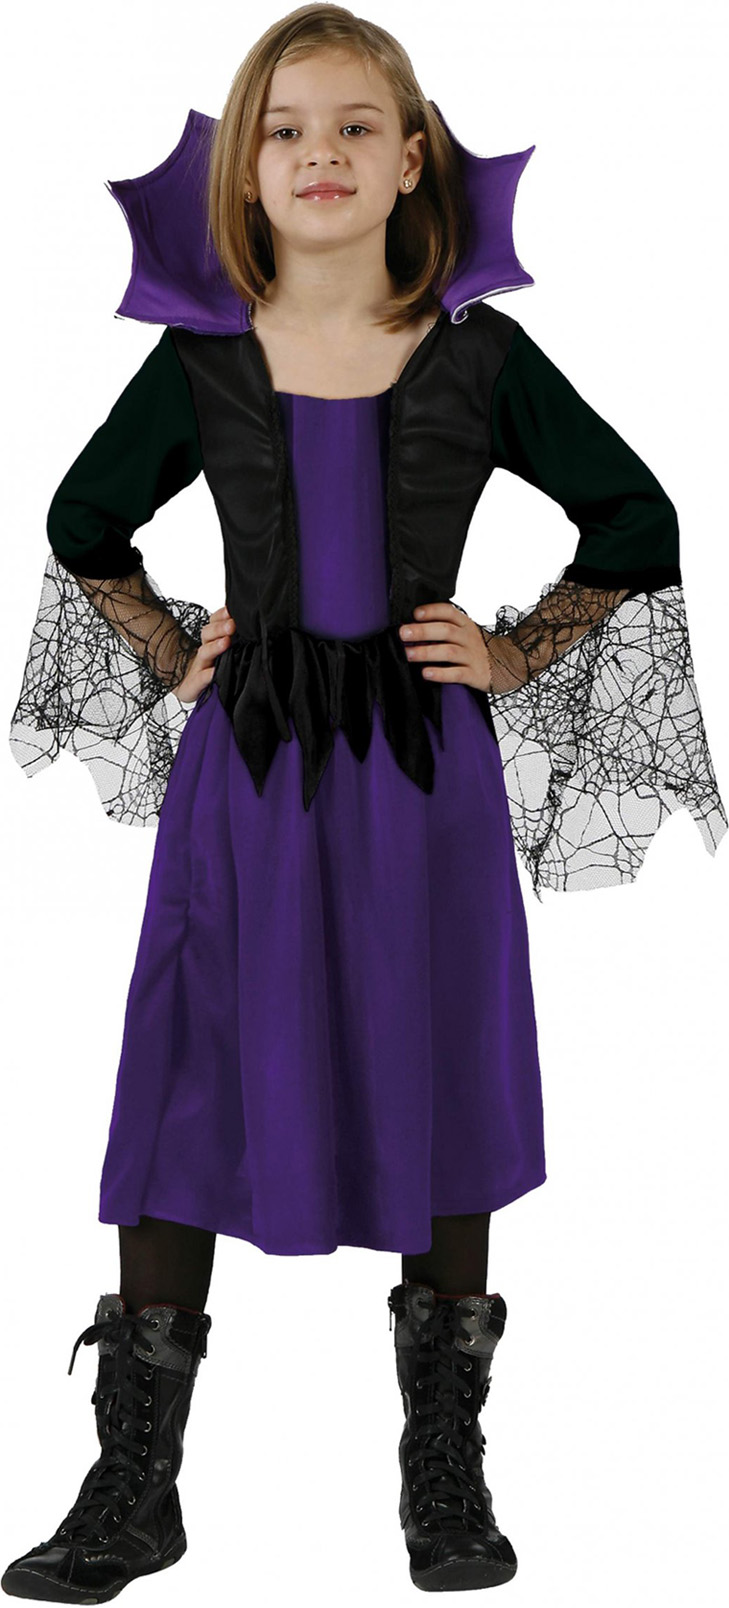 Spider witch costume N5993